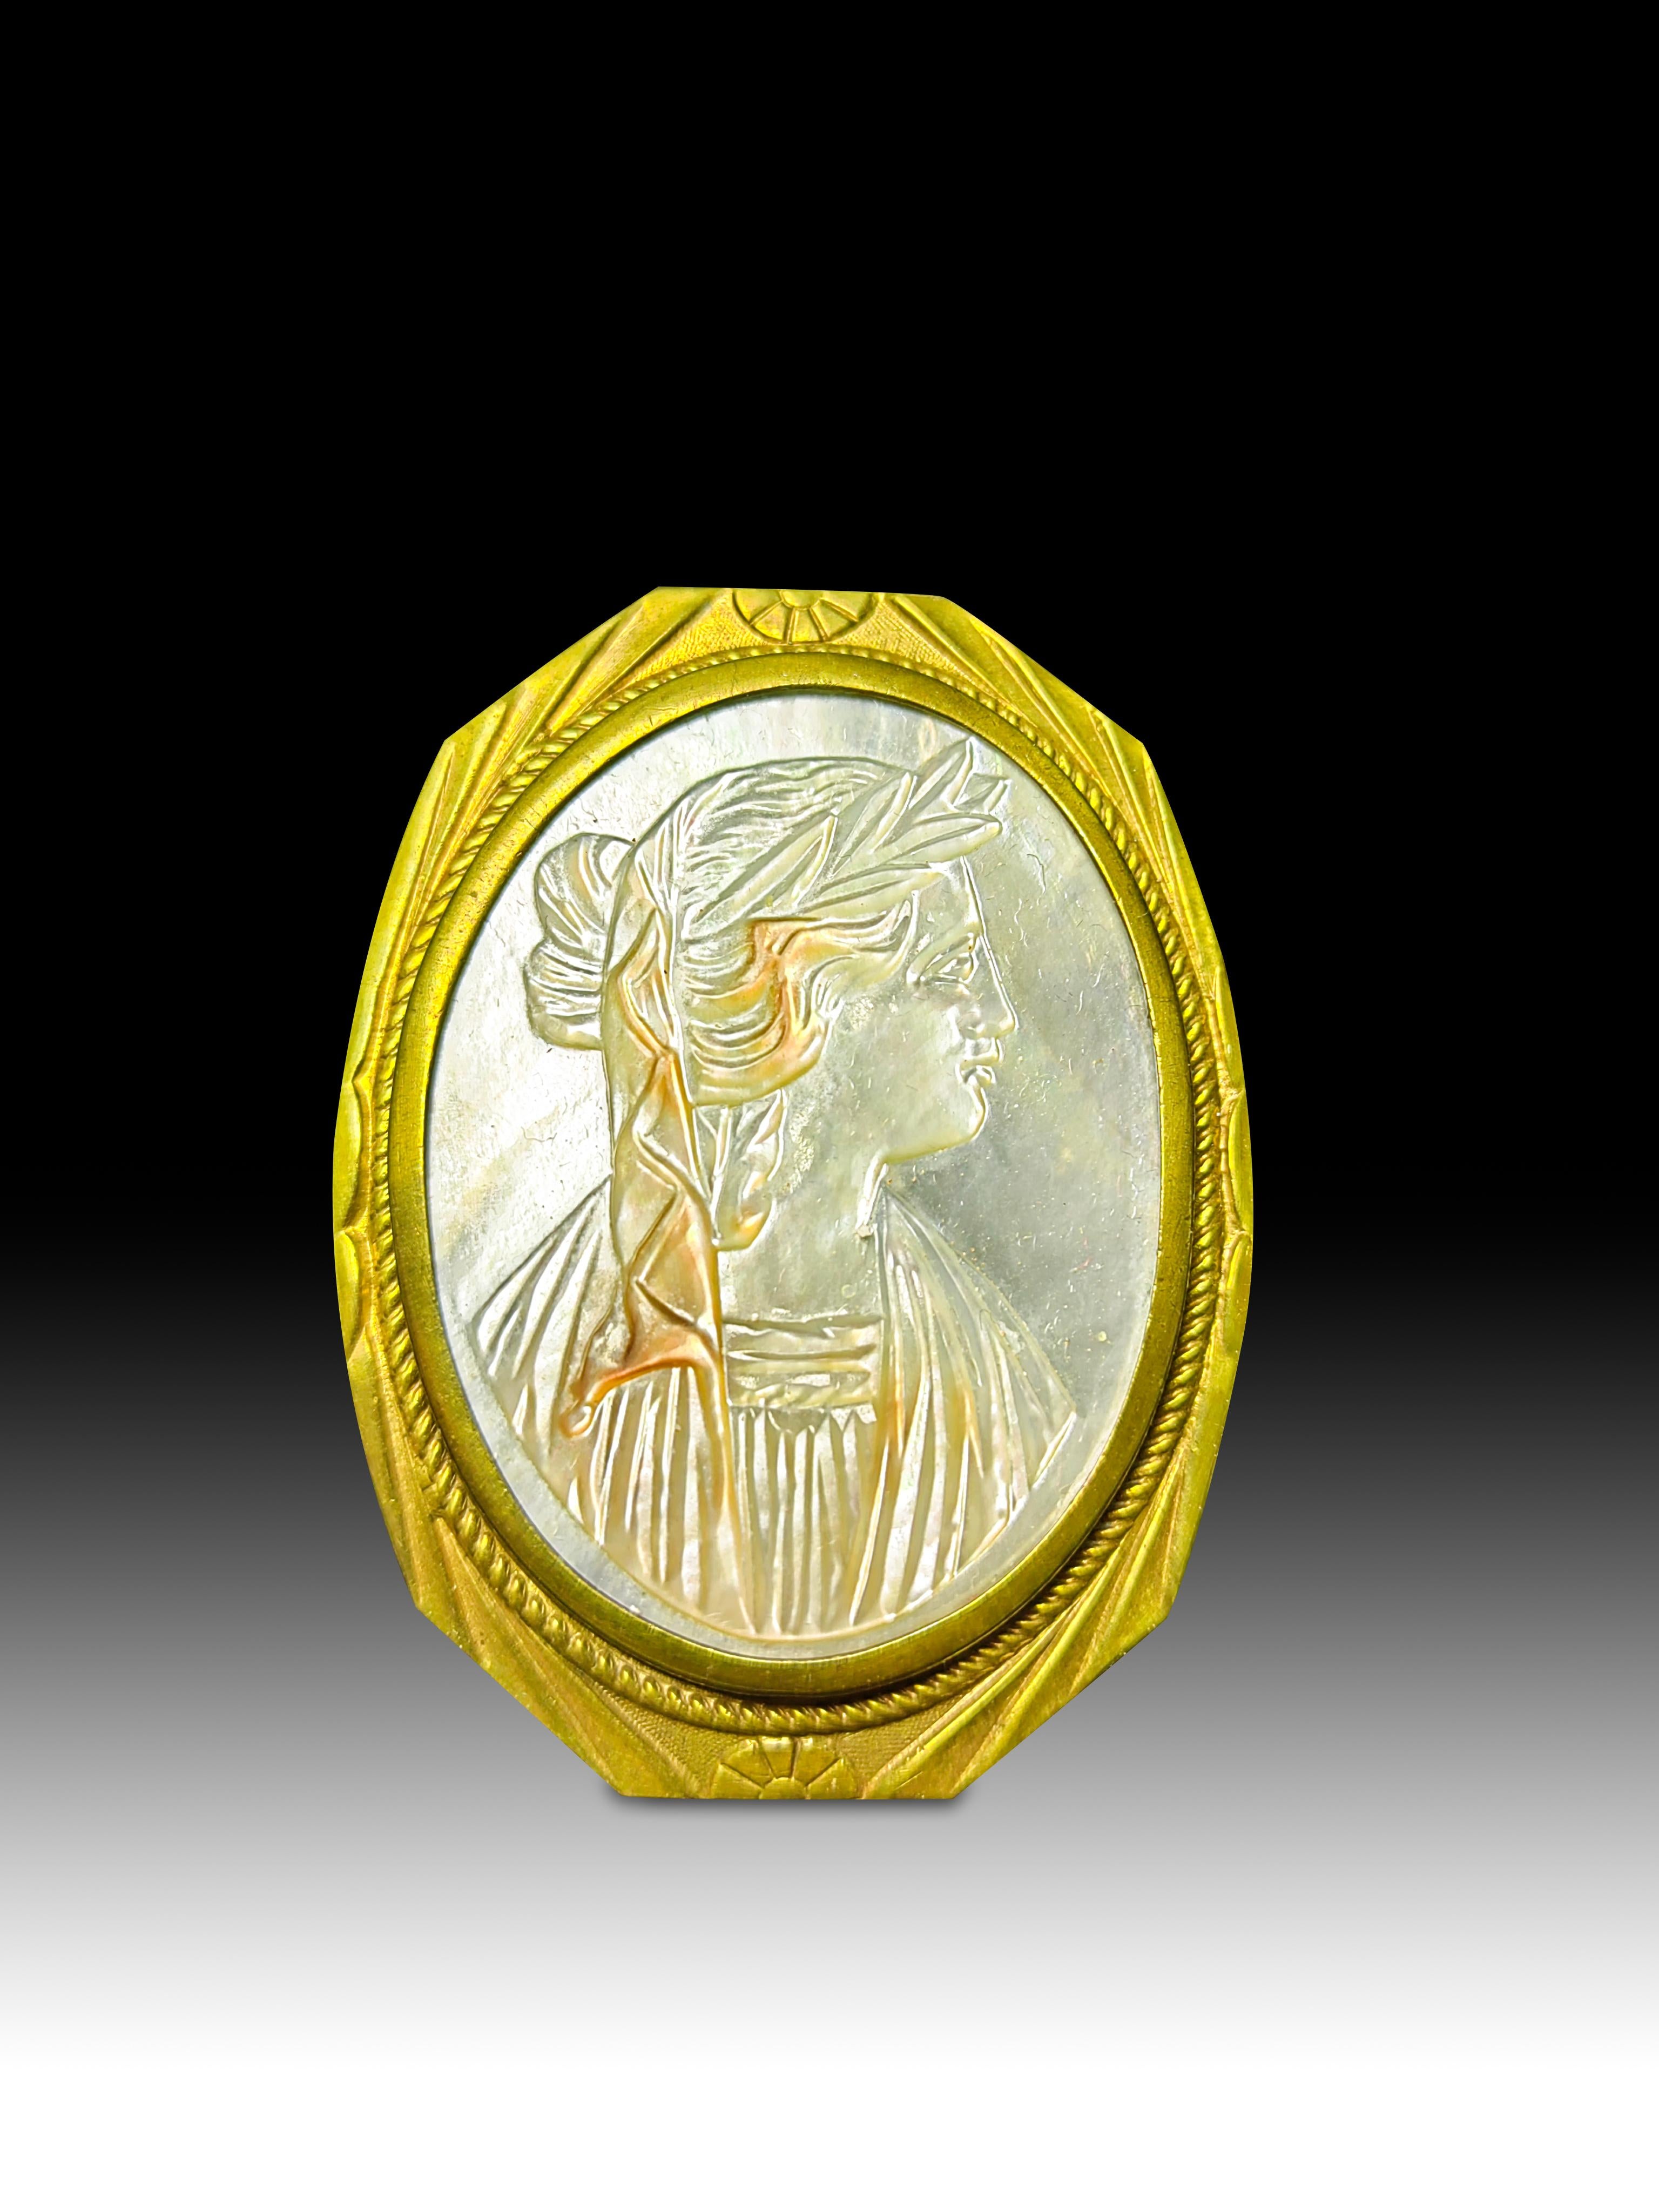 1920s Cameo
Elegant cameo from the 1920s carved in a shell and decorated with gilded brass.Dimensions: 6x4x0.5 cm